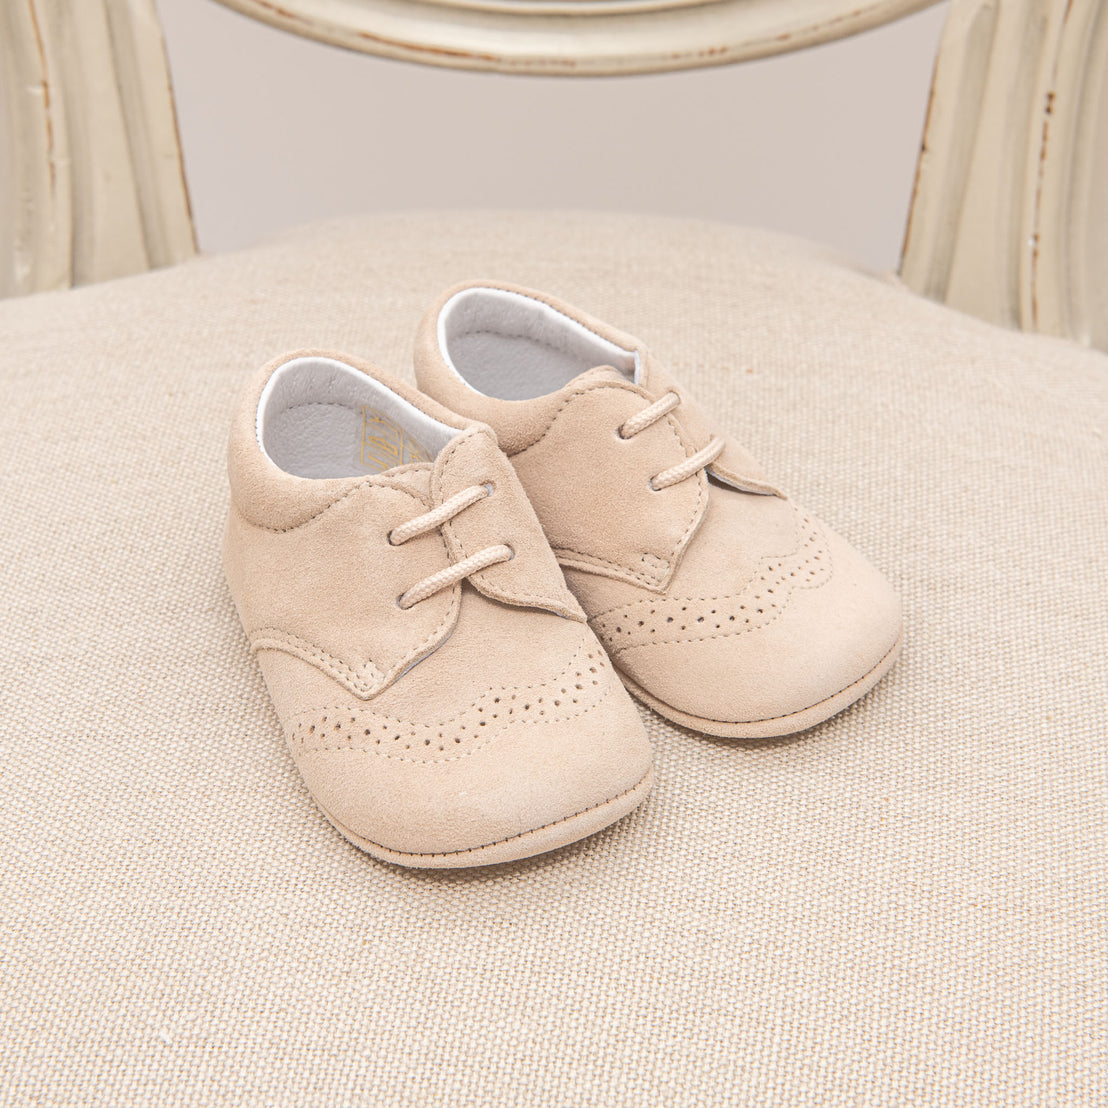 A pair of small camel suede shoes for toddlers placed neatly on a beige cushioned chair with a classic wooden frame in the background.